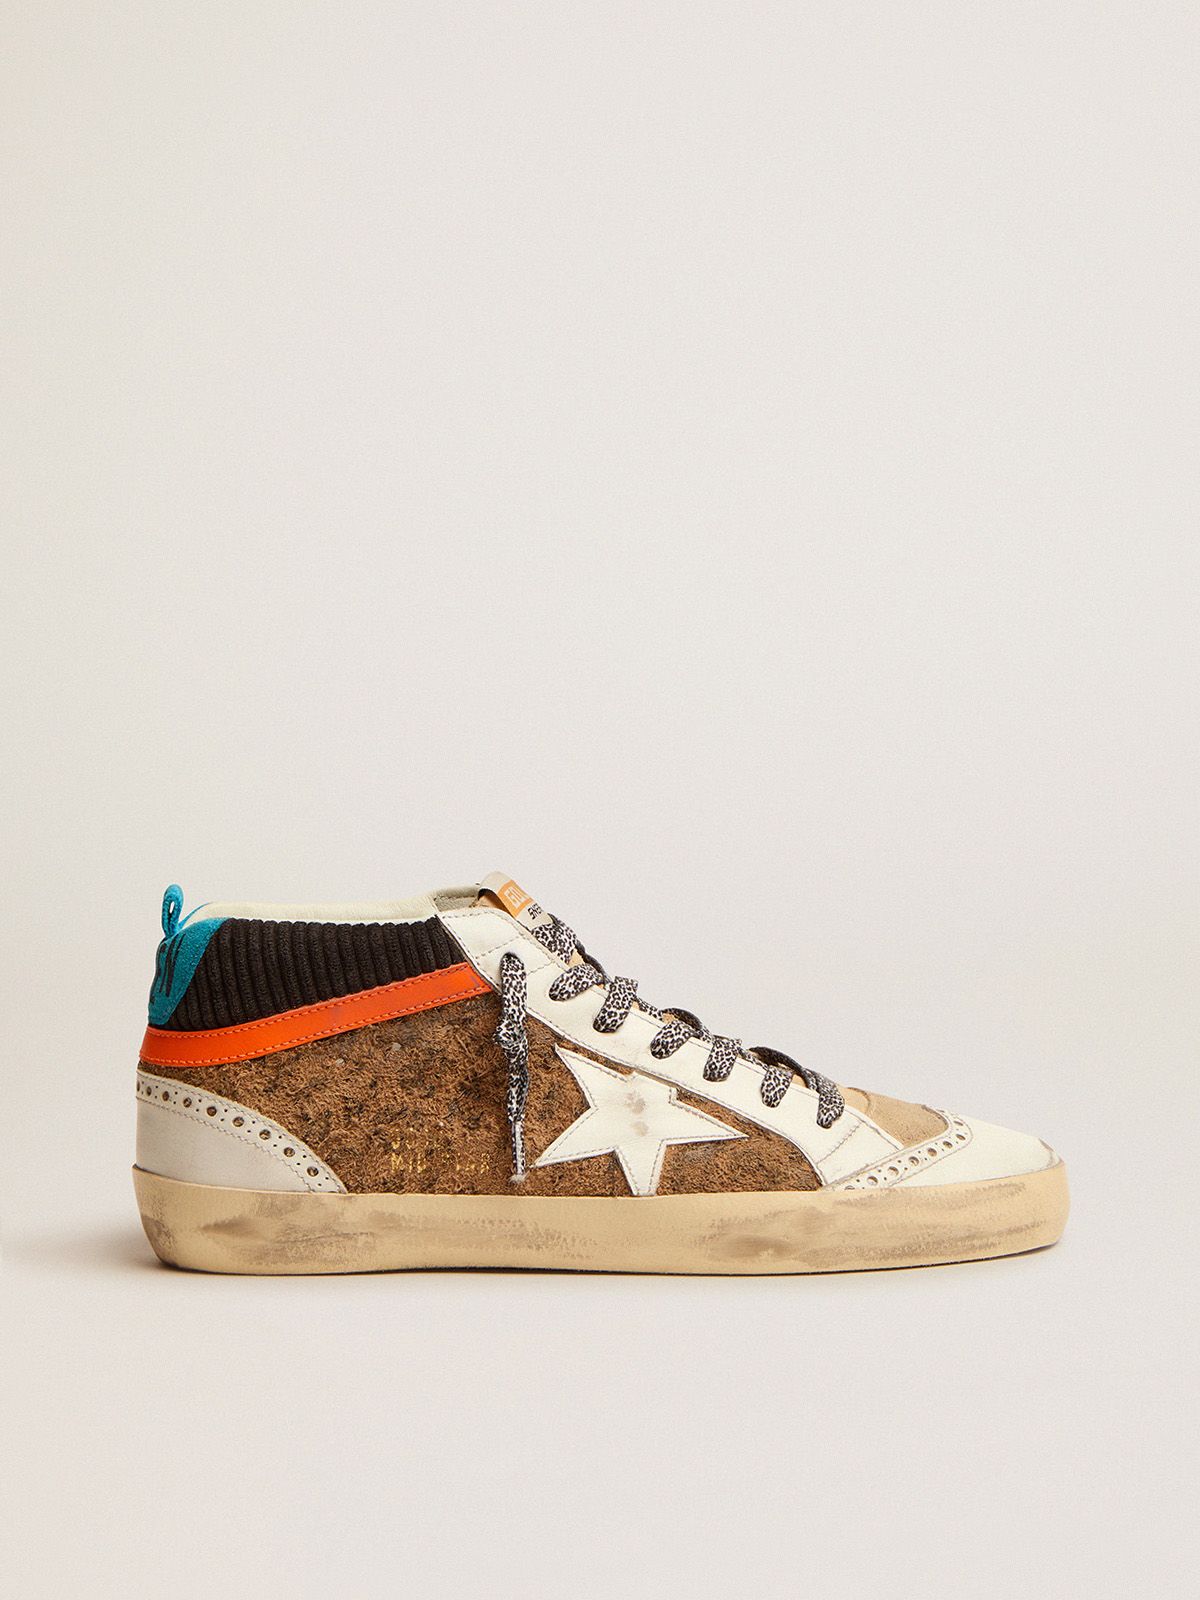 golden goose sneakers Mid corduroy-print upper suede LTD Star leopard-print and with